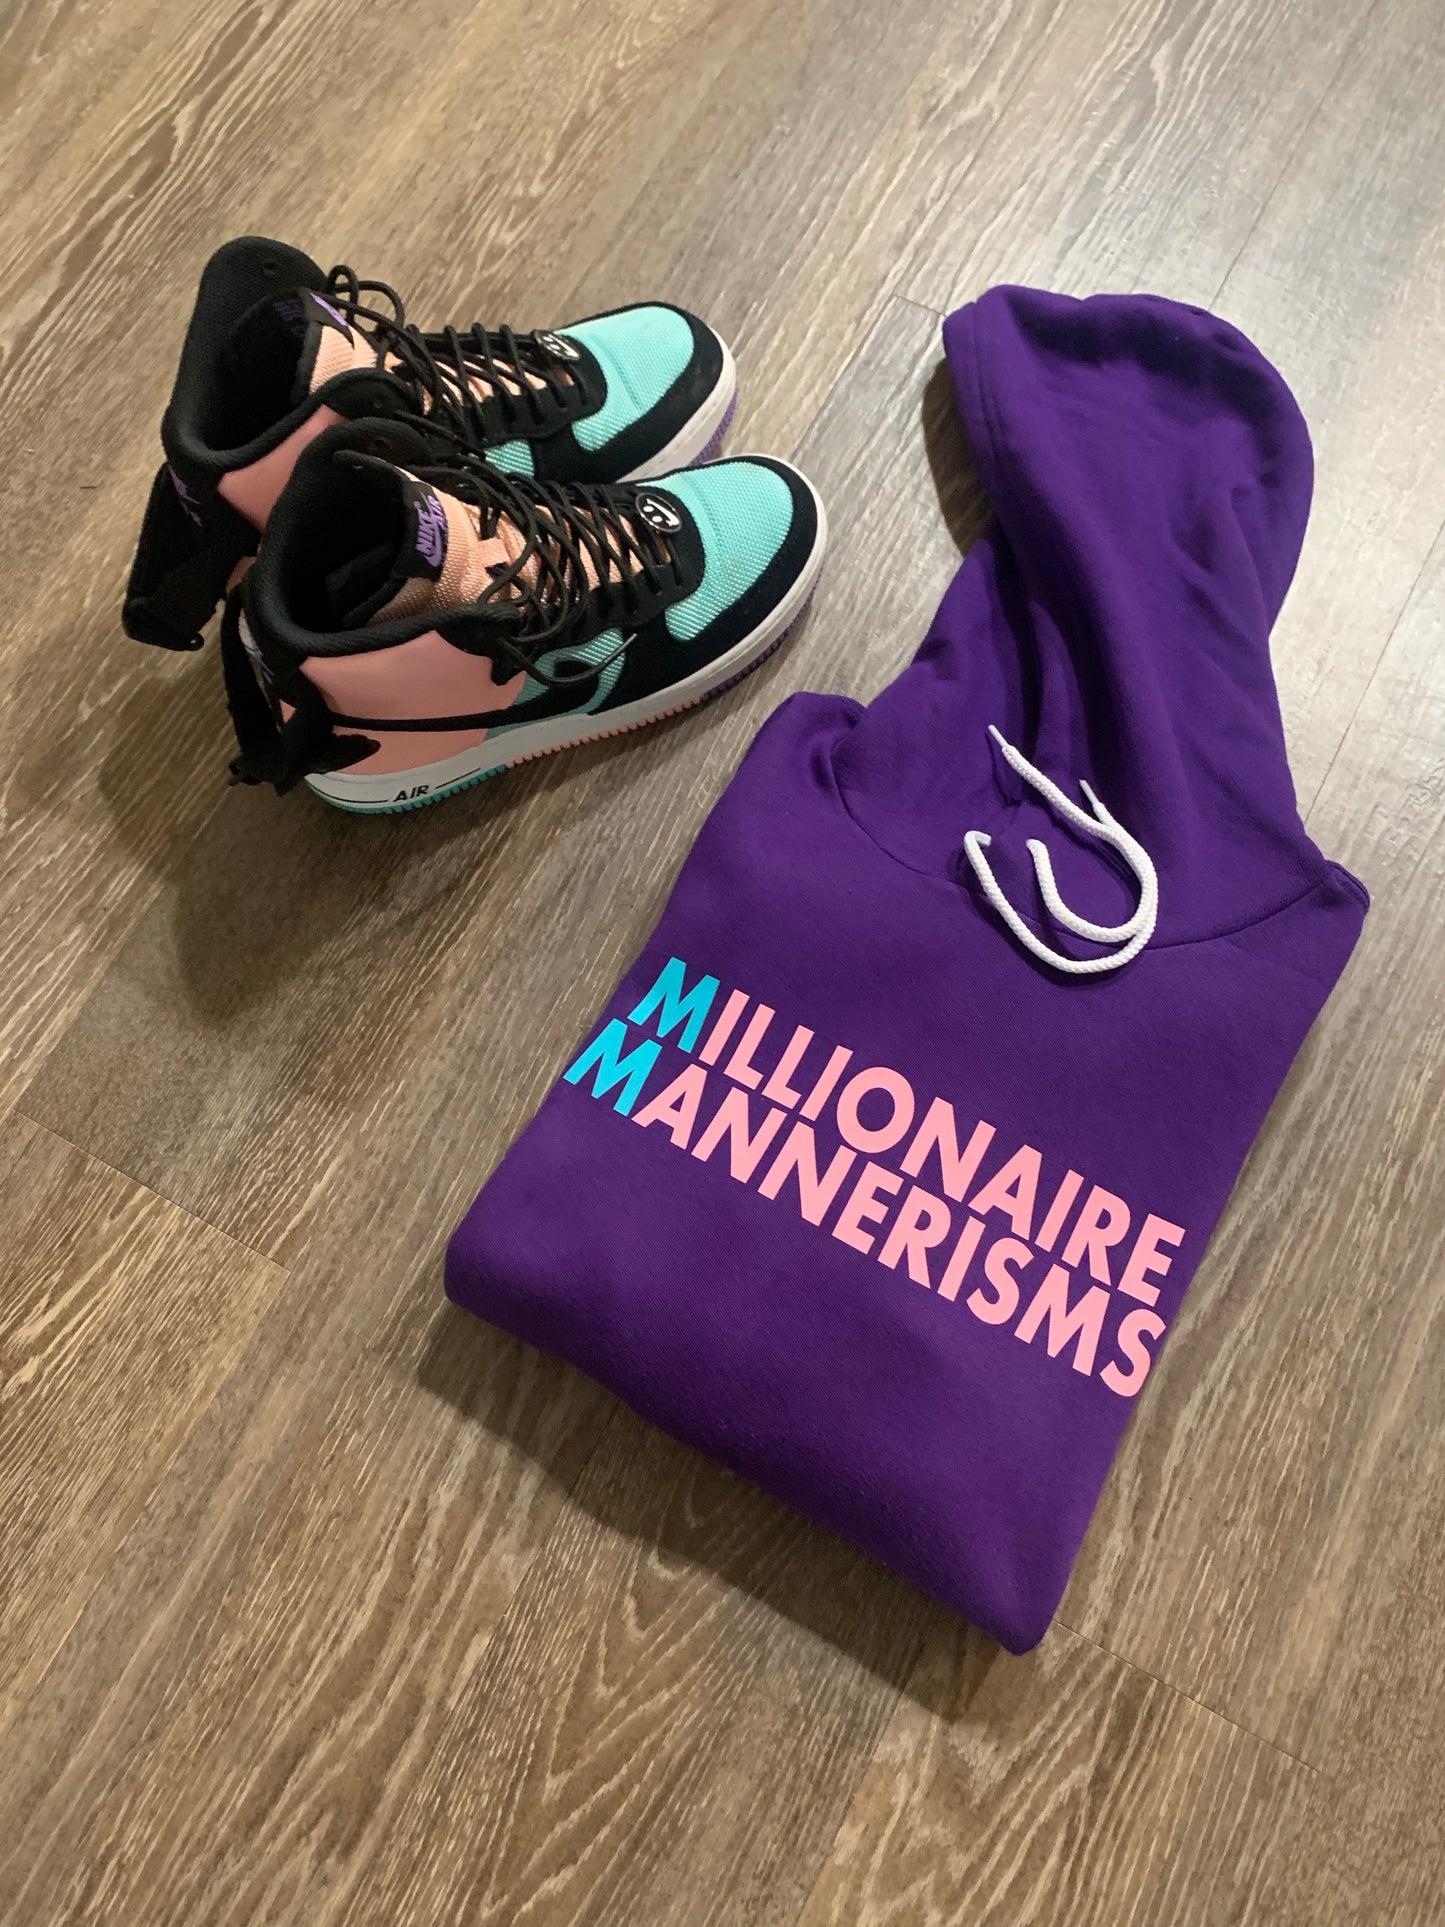 MILLIONAIRE MANNERISMS HOODIE (Custom Have A Nike Day Color Way)